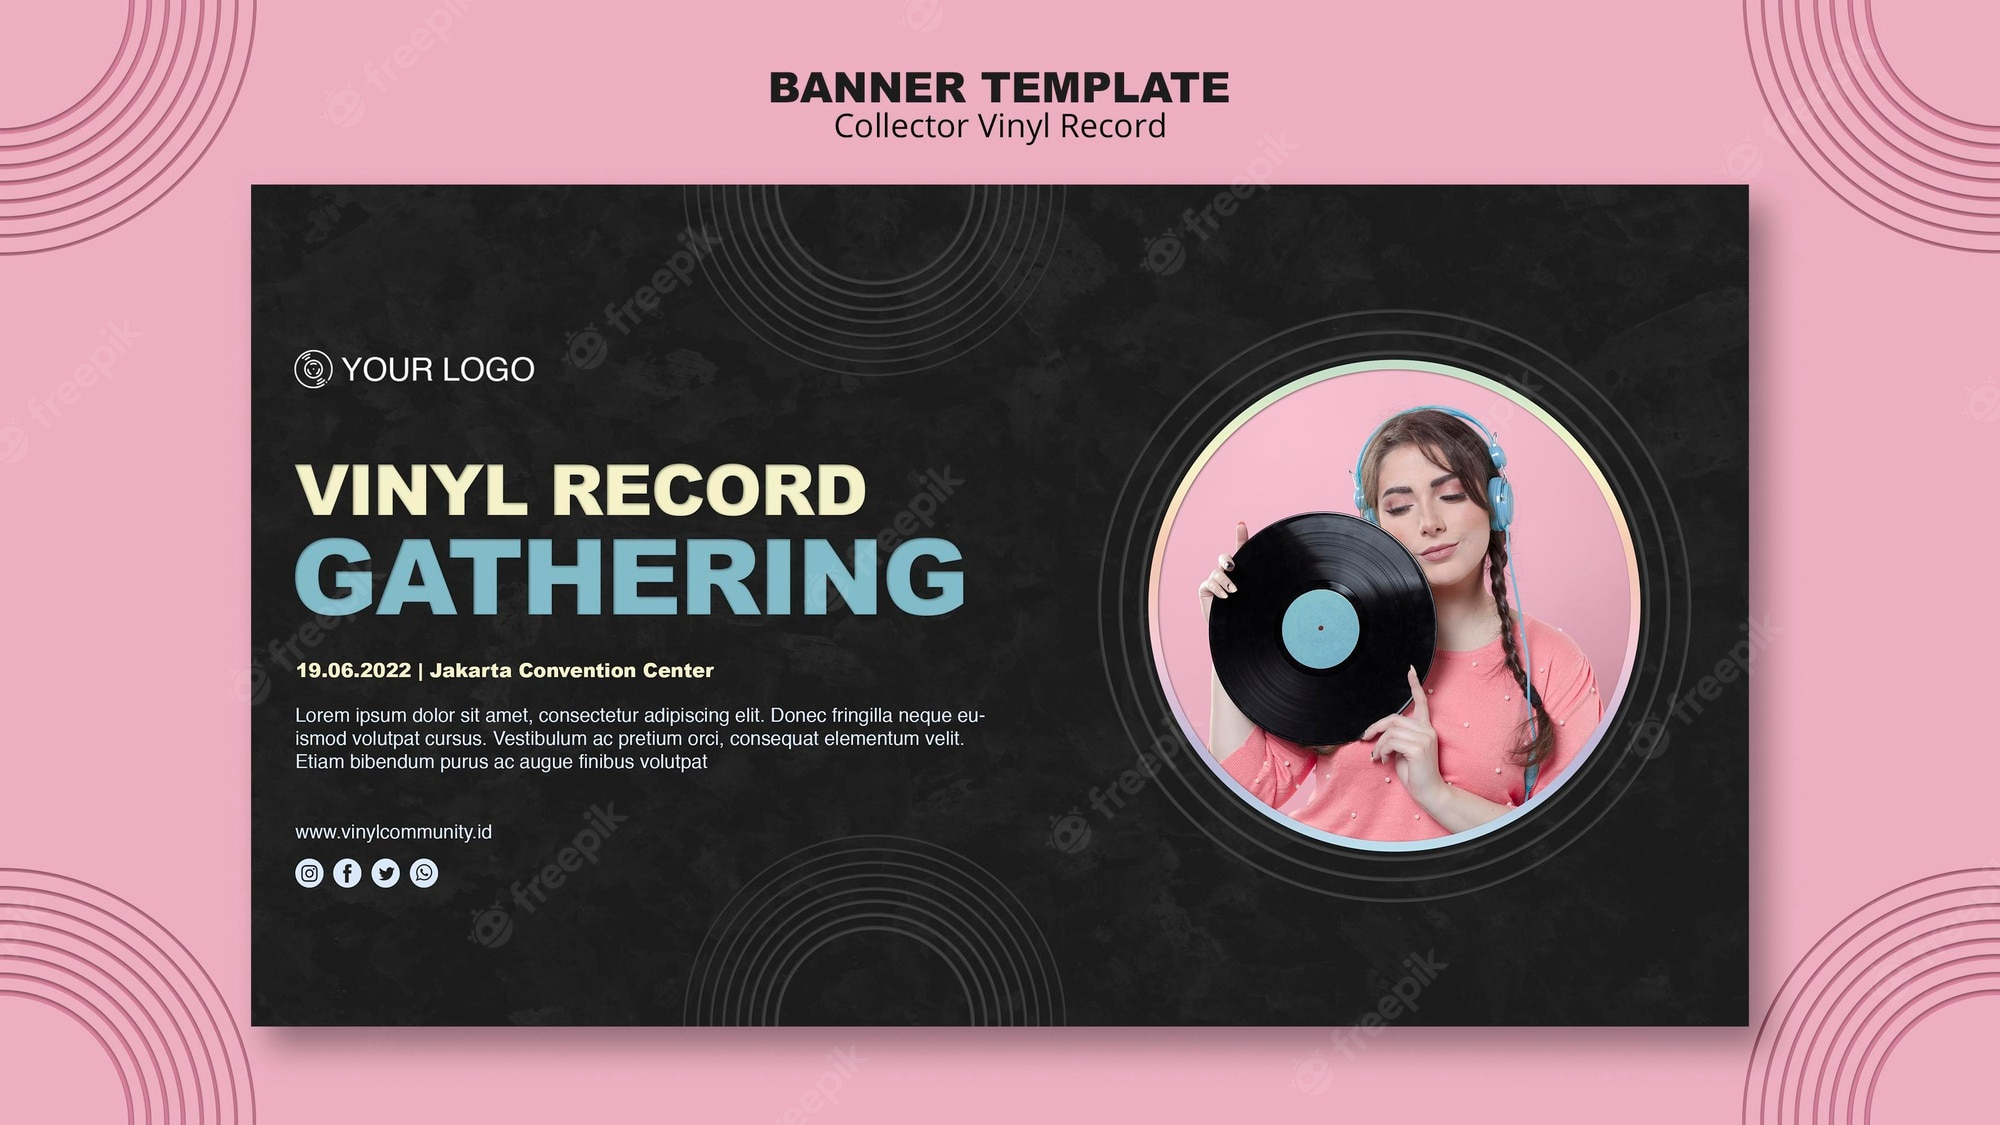 Vinyl Banner PSD, 10+ High Quality Free PSD Templates for Download Throughout Vinyl Banner Design Templates